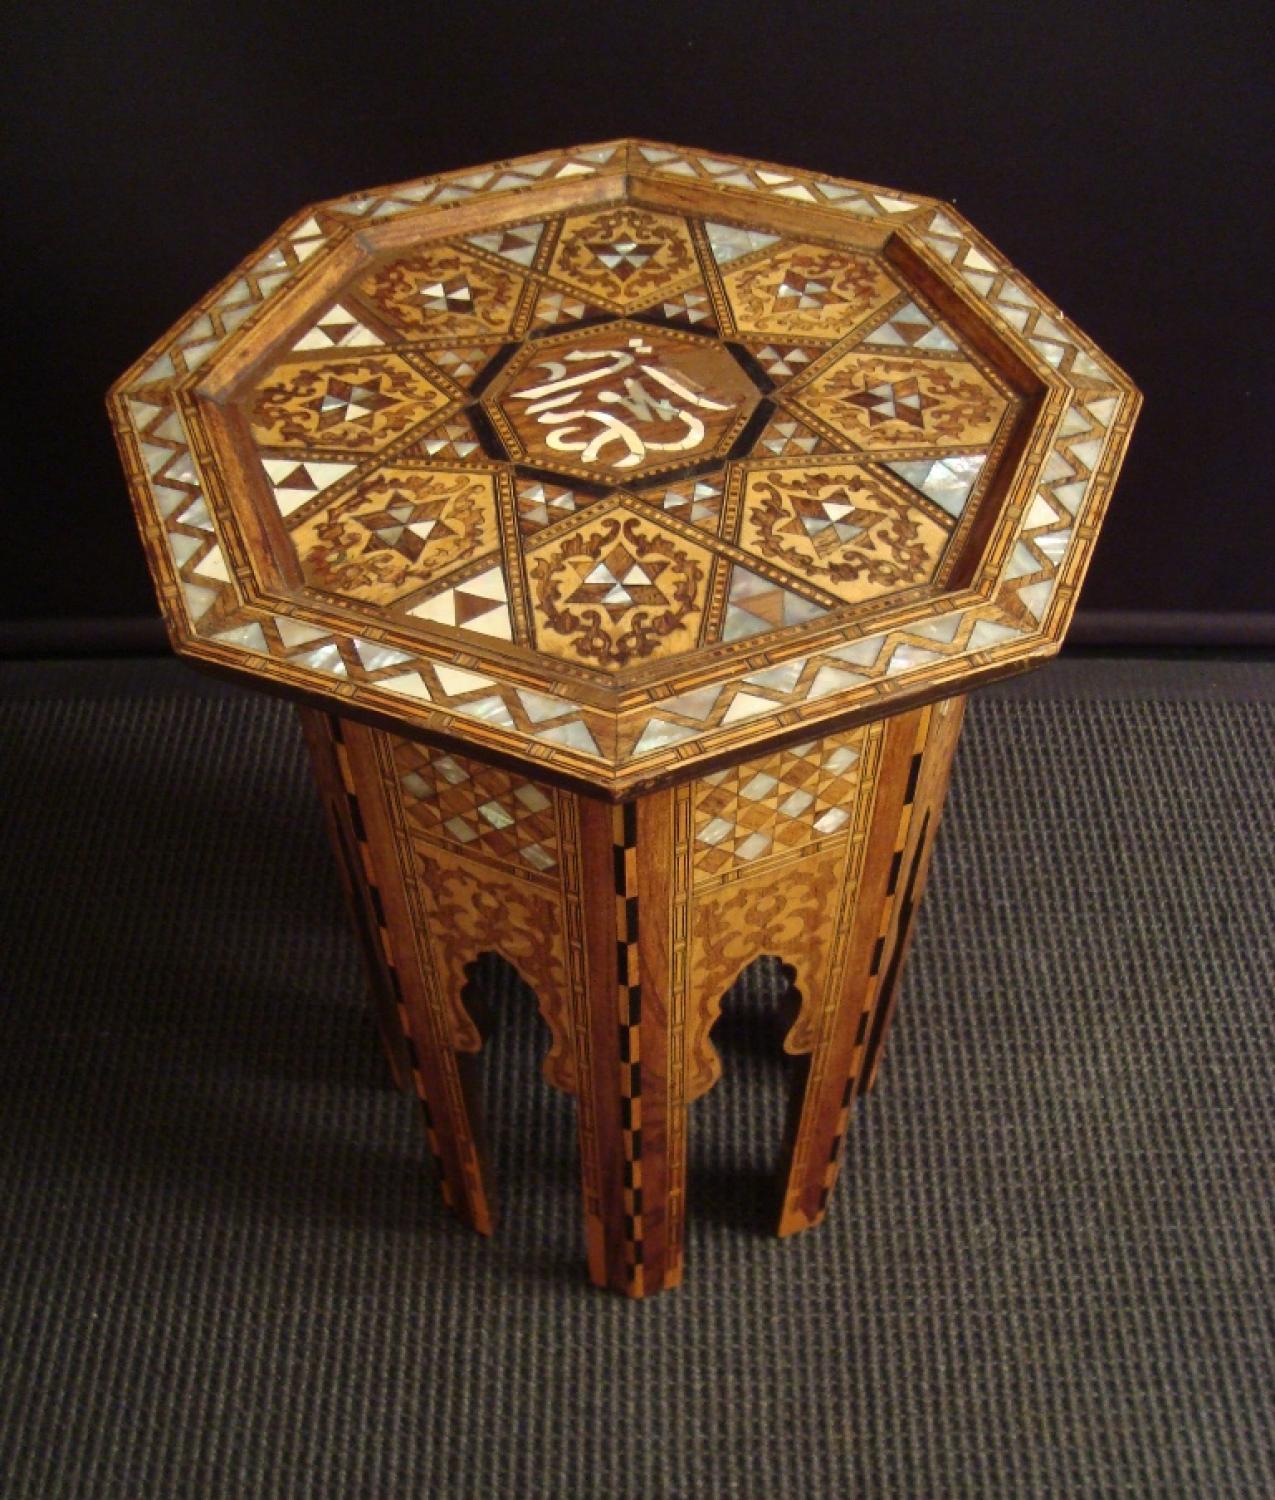 A mother of pearl and hardwood inlaid table